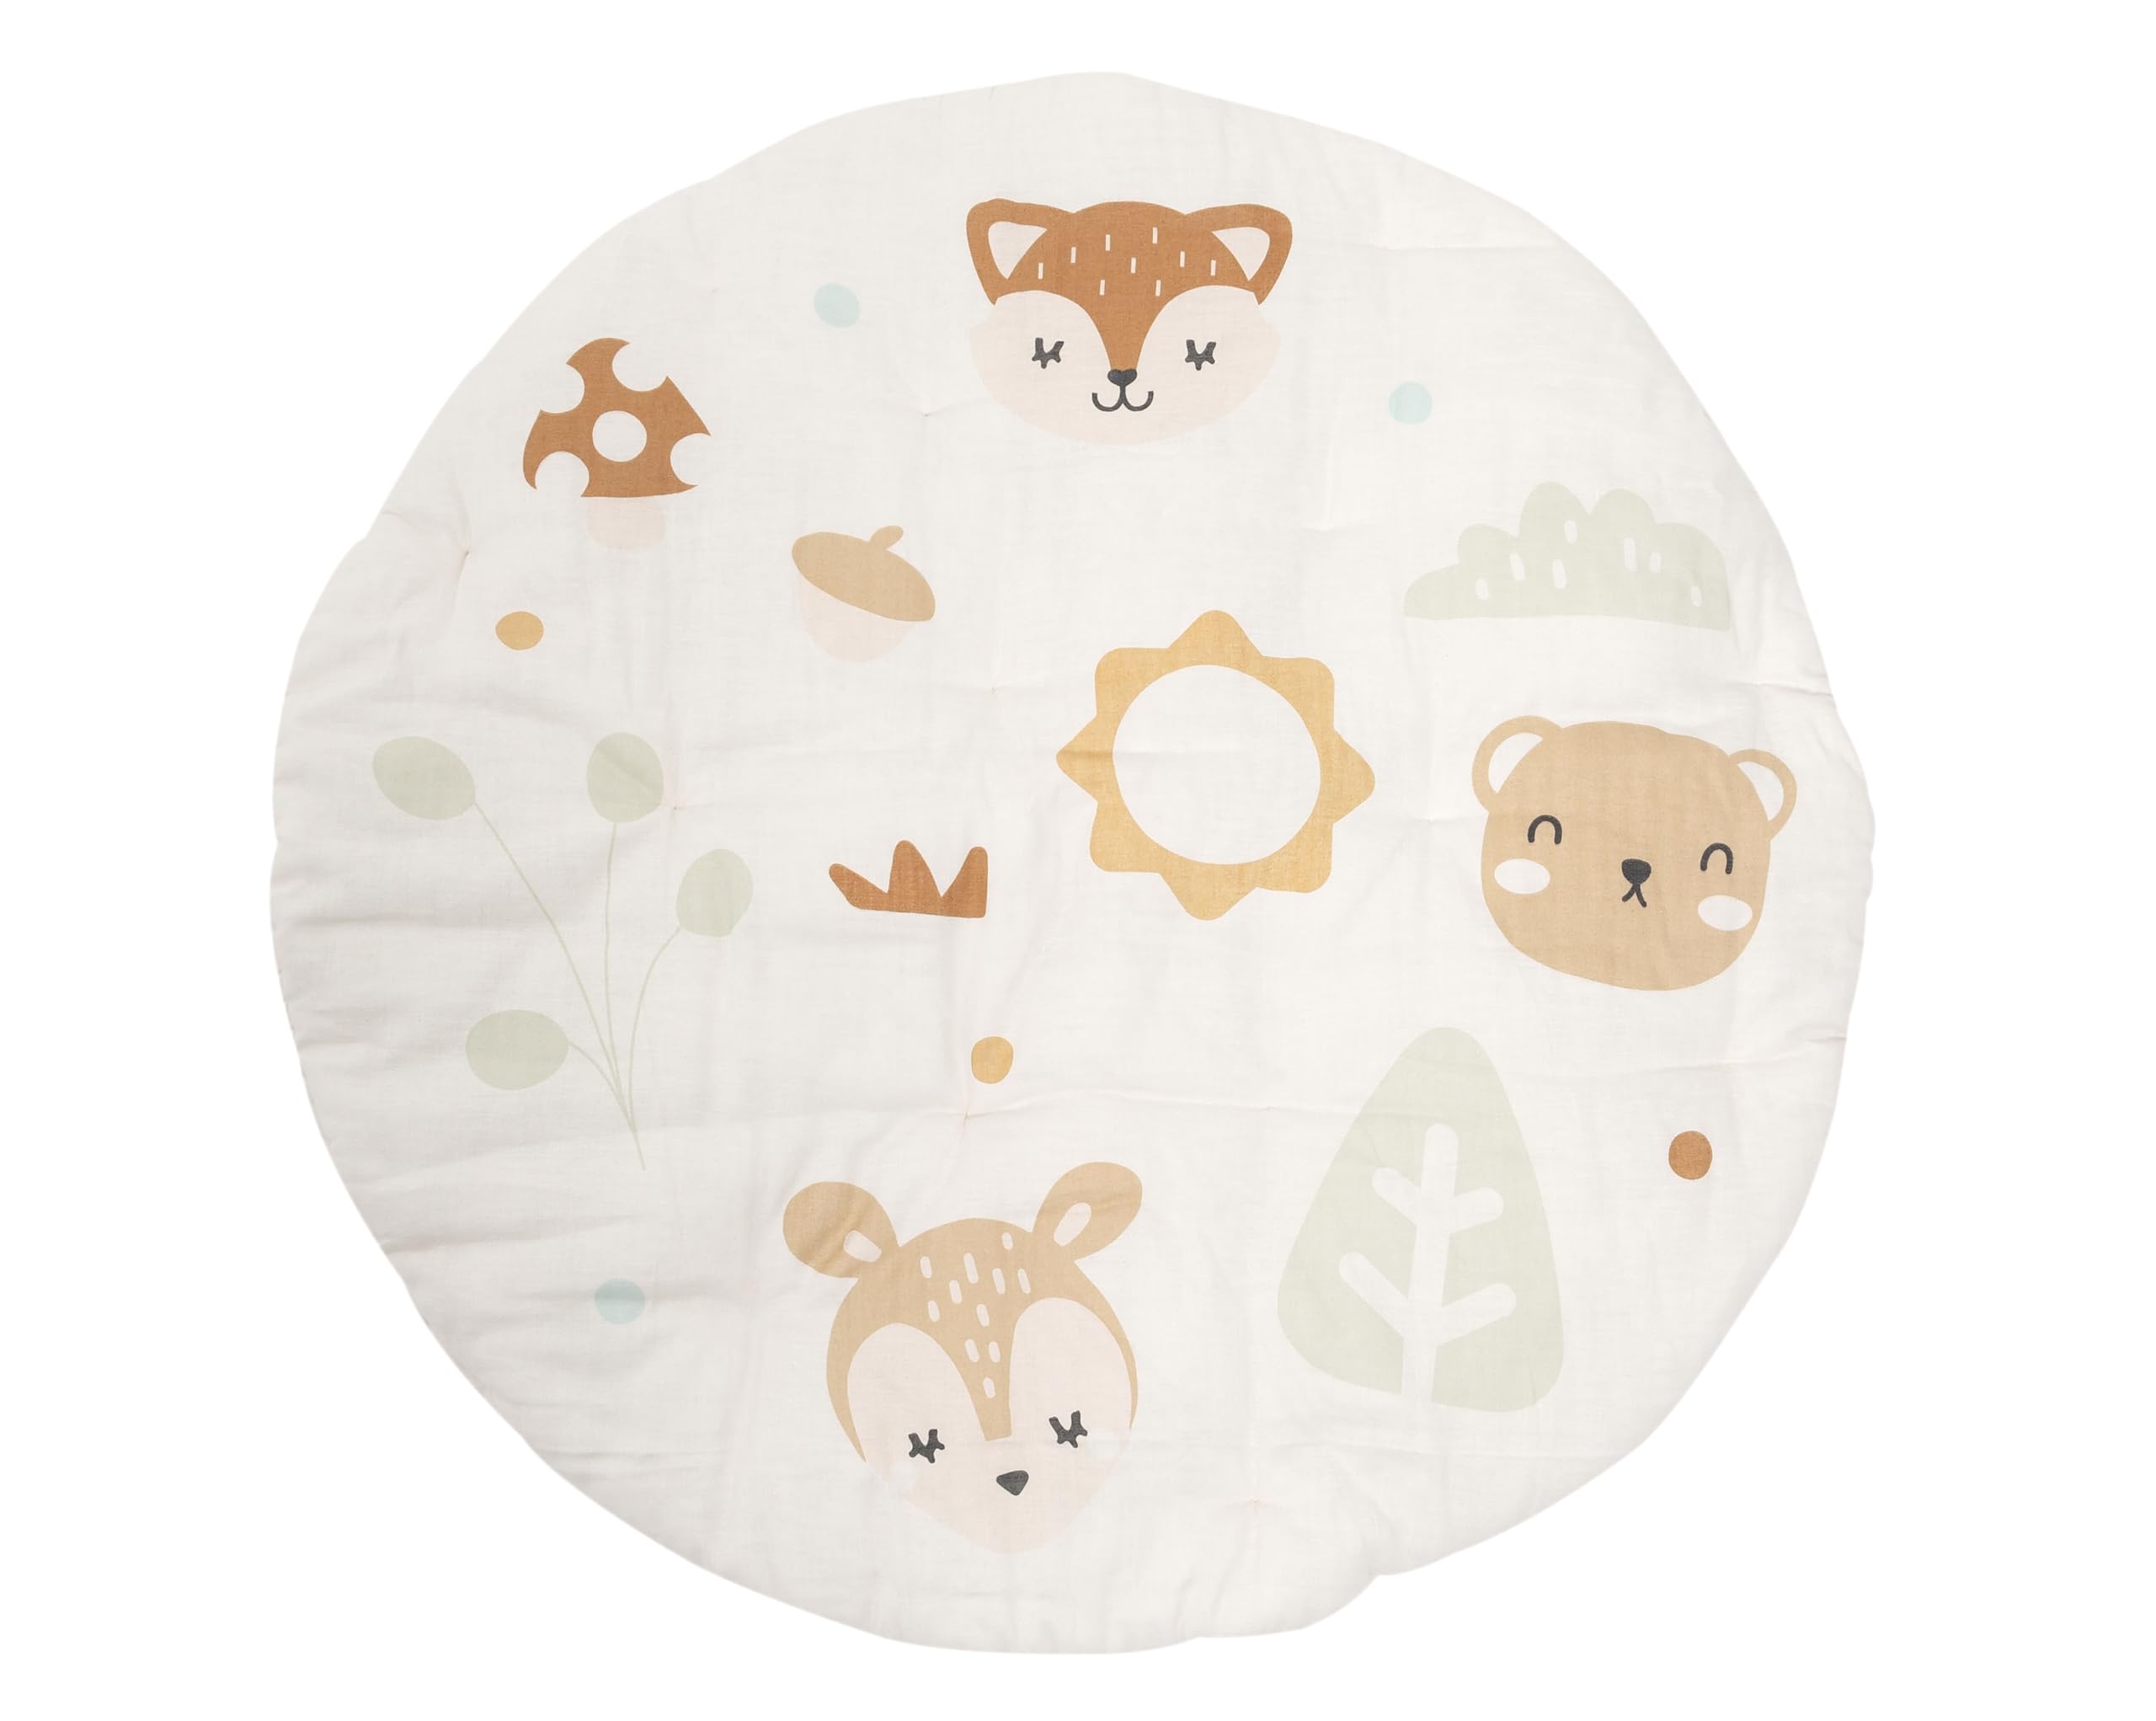 Pearhead Woodland Plush Play Mat, Portable and Washable Baby Tummy Time and Play Gym Mat, Gender Neutral Nursery Décor, Plush Cotton Play Mat